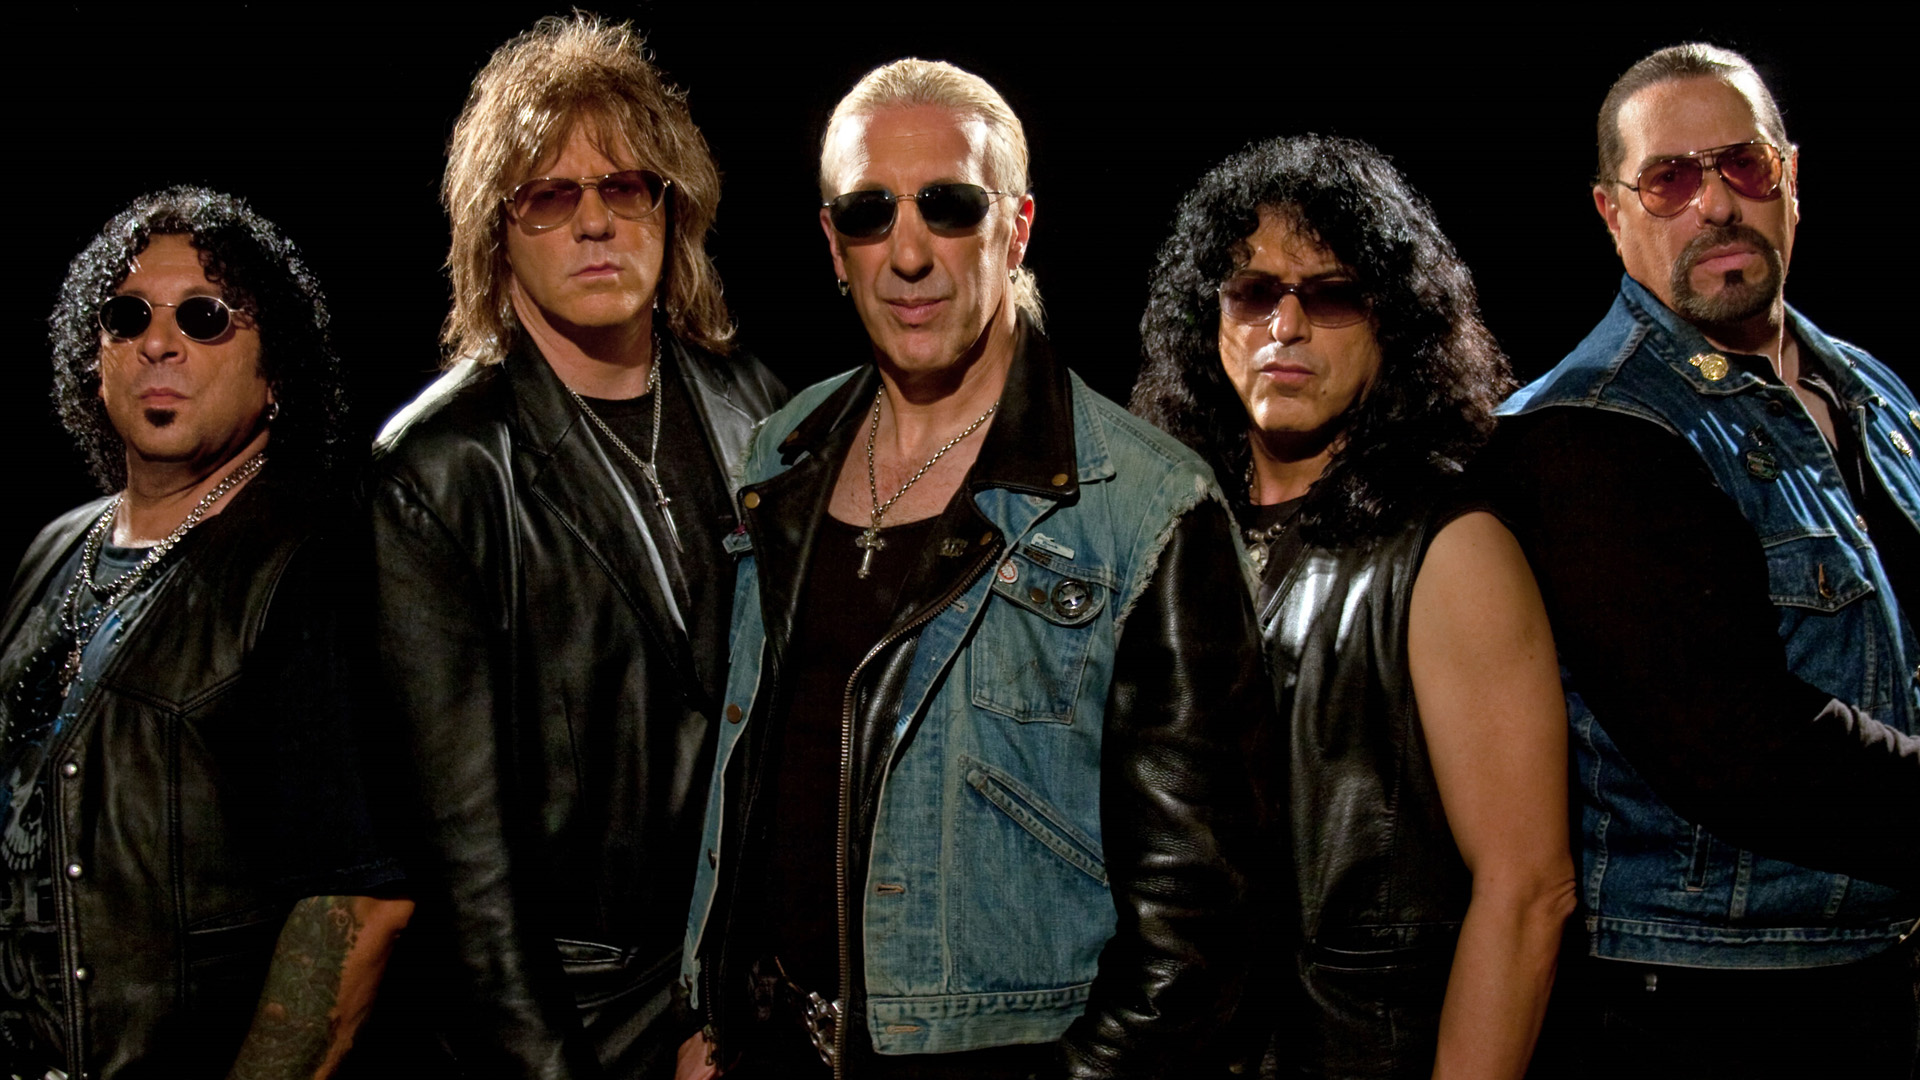 You Can't Stop Rock Roll av Twisted Sister